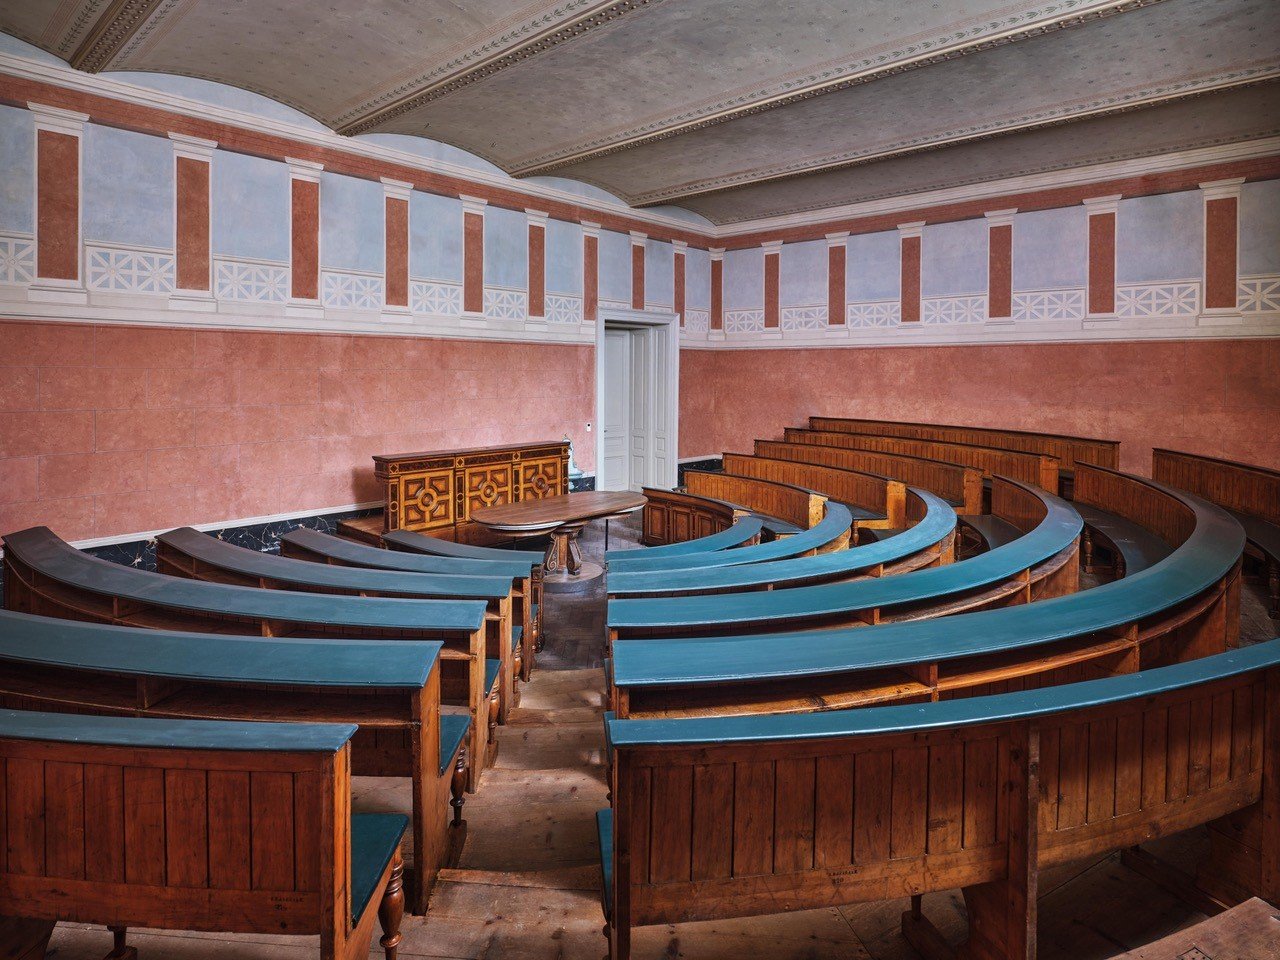 Photograph of a lecture hall in which the rows of wooden benches have been arranged in a stepped semicircle, with a table and lectern in the center, the walls painted in terracotta colors with illusionistic columns interrupted by a white railing.